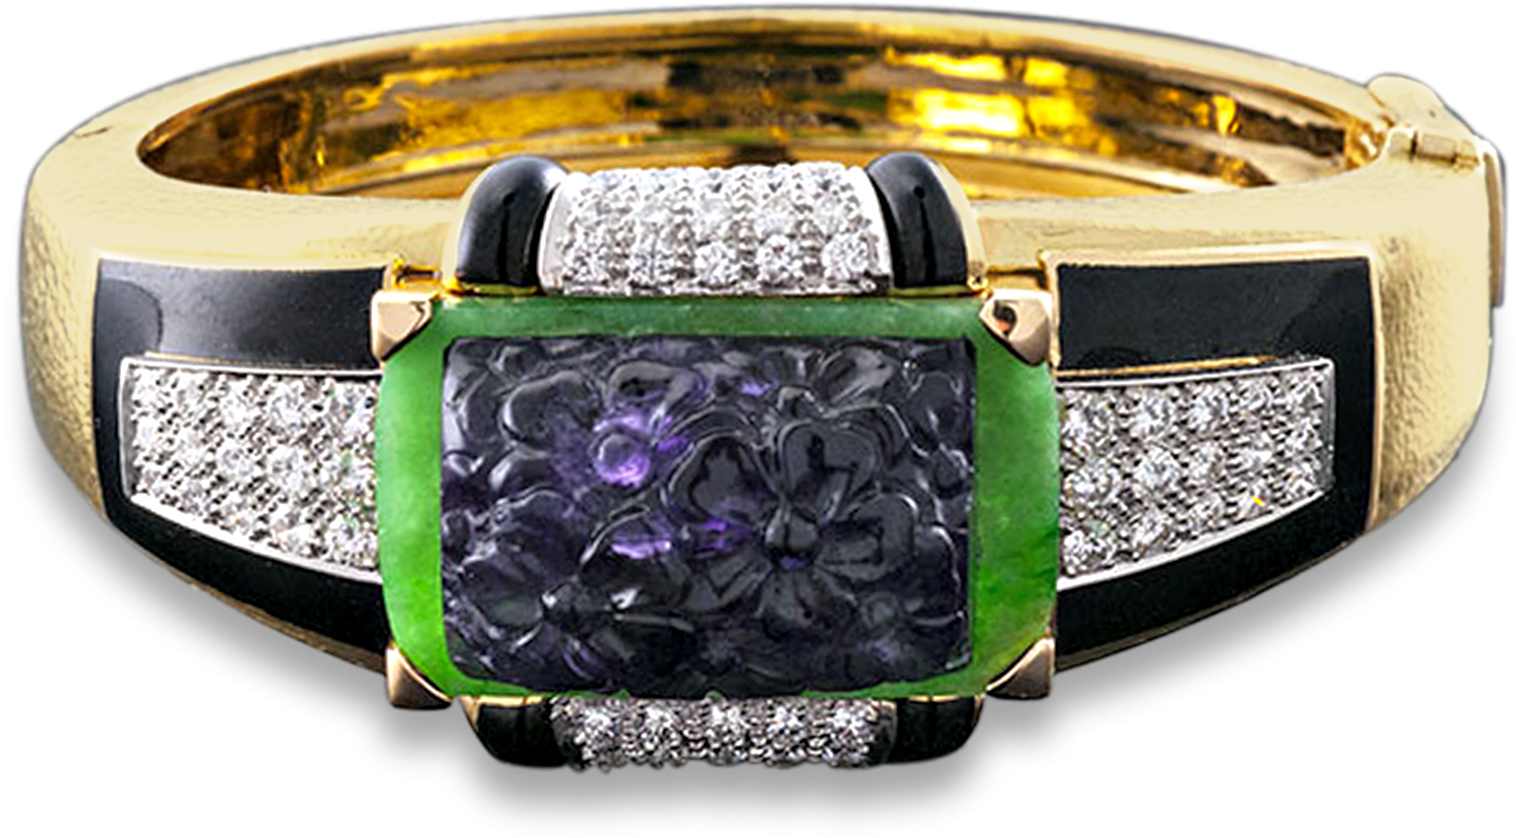 A Gold And Black Bracelet With A Green Square And Diamonds